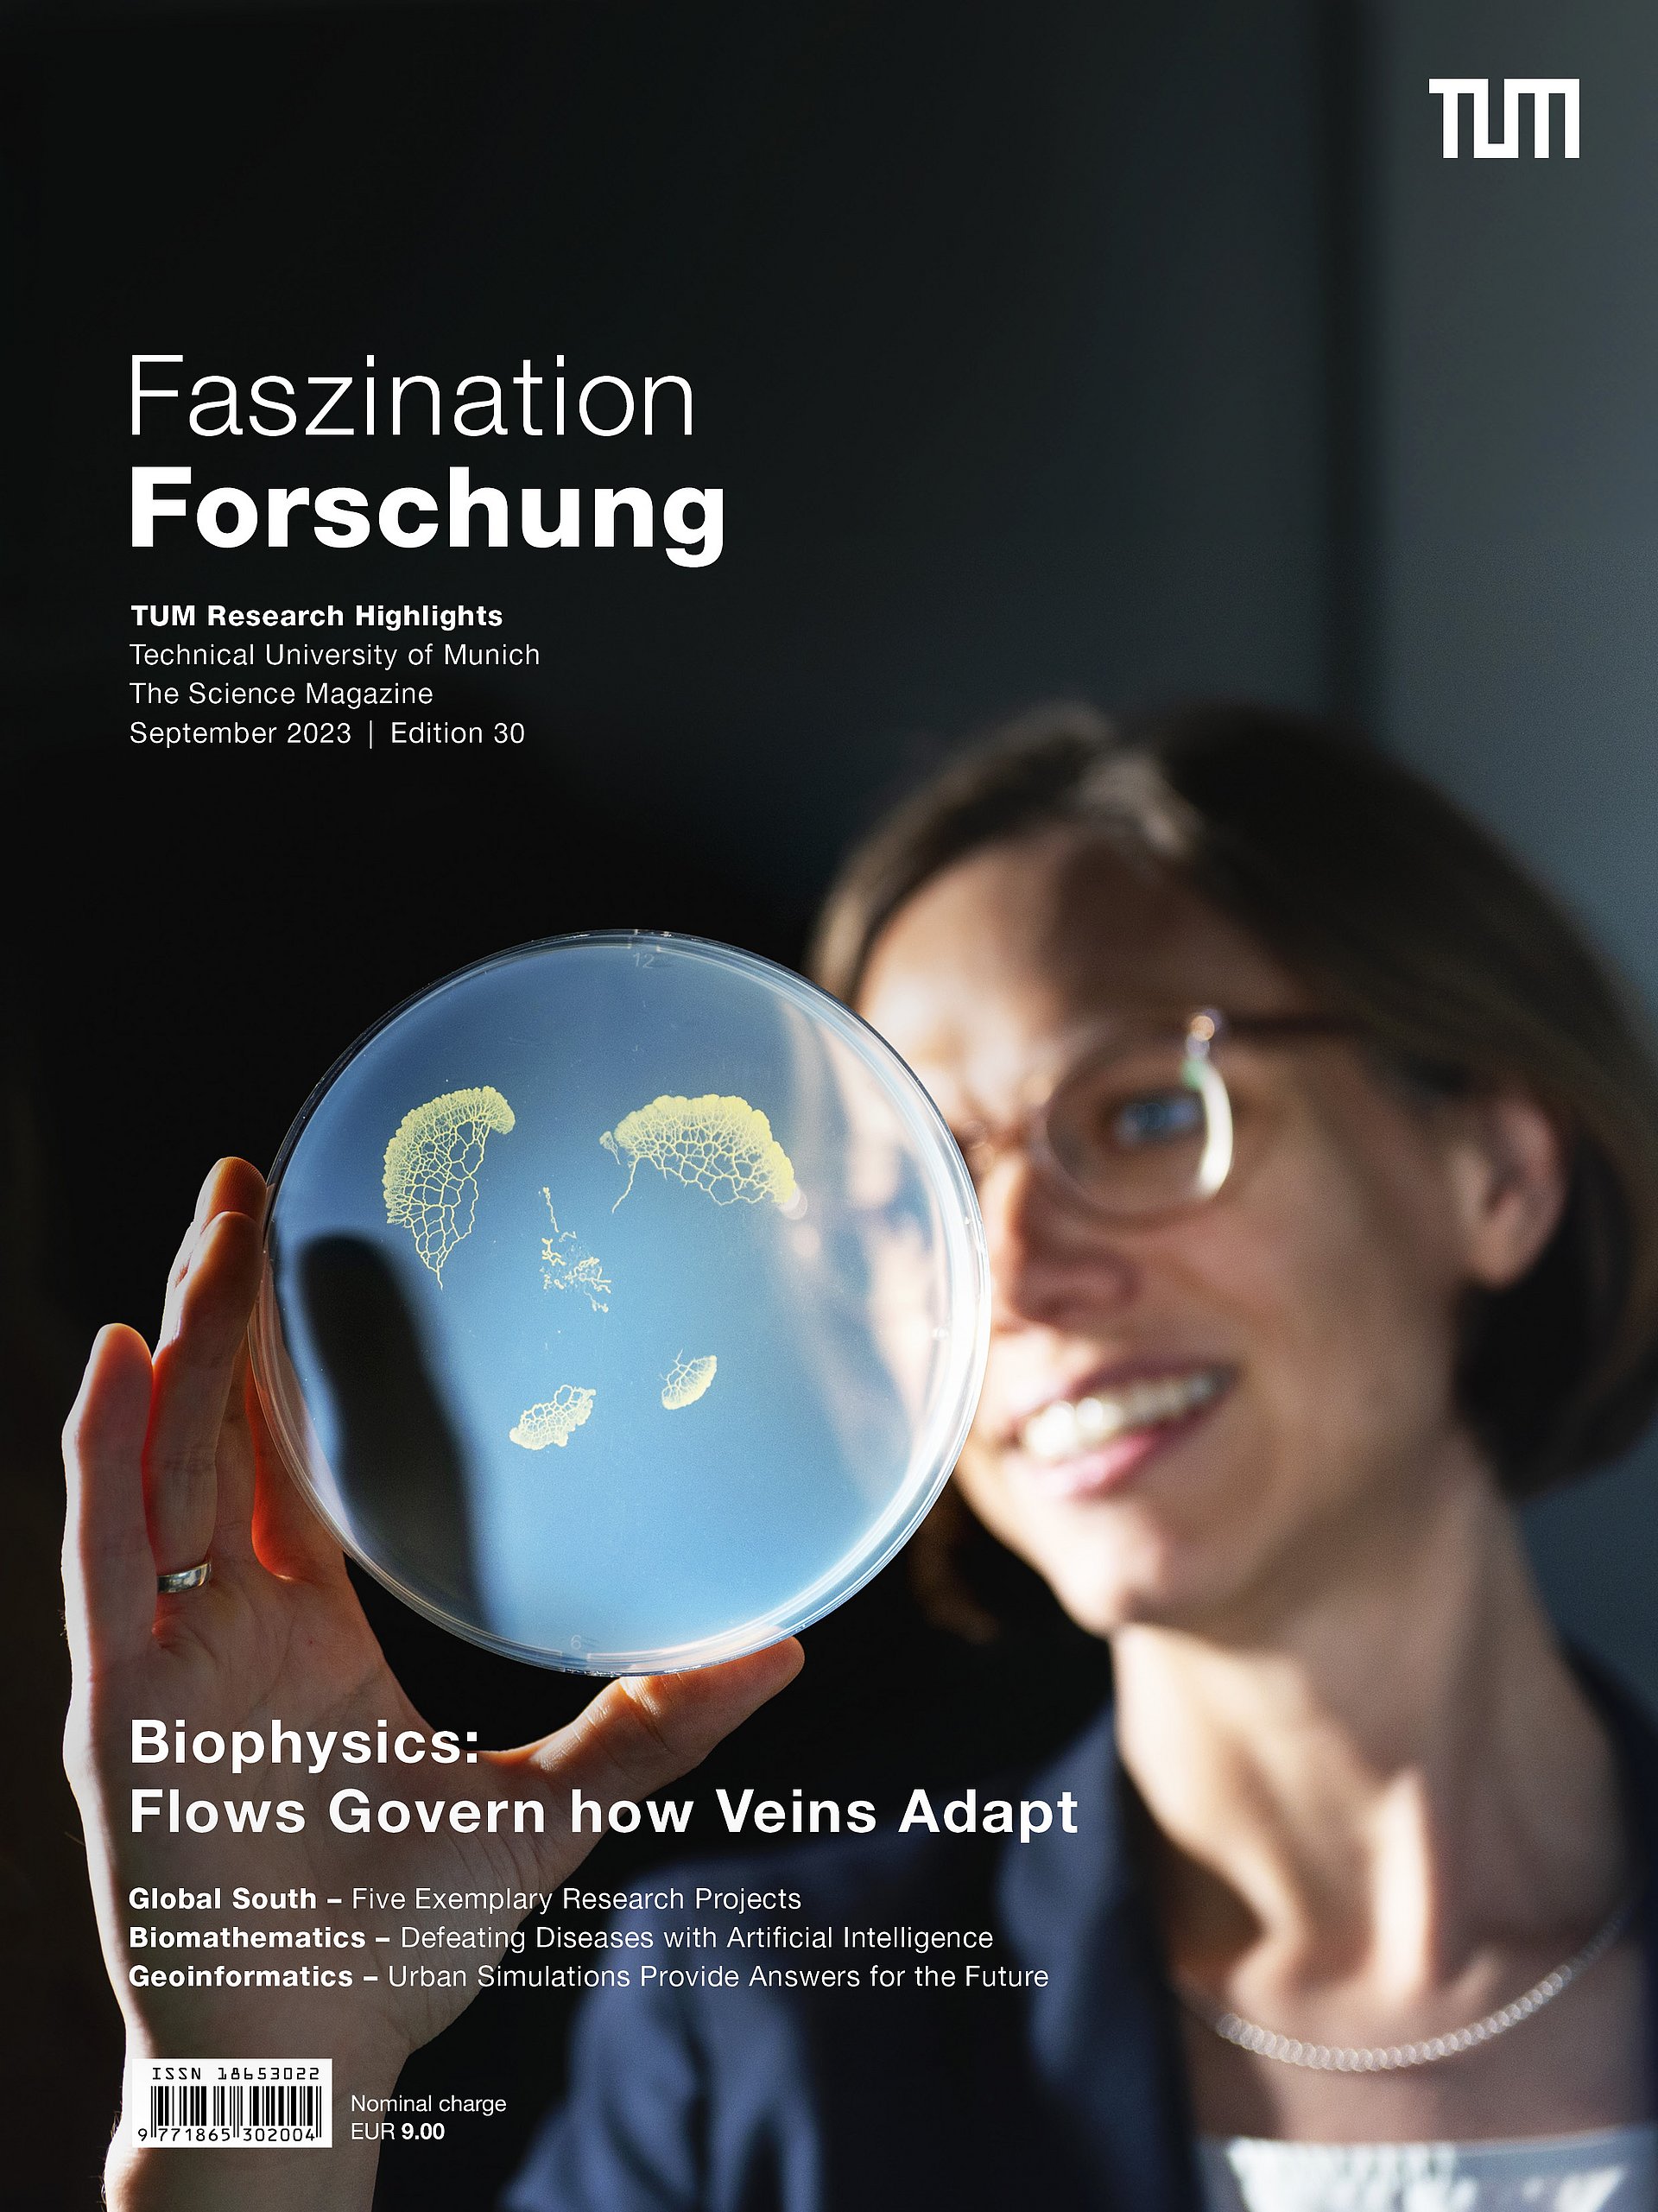 Cover page of “Faszination Forschung” magazine, edition 30